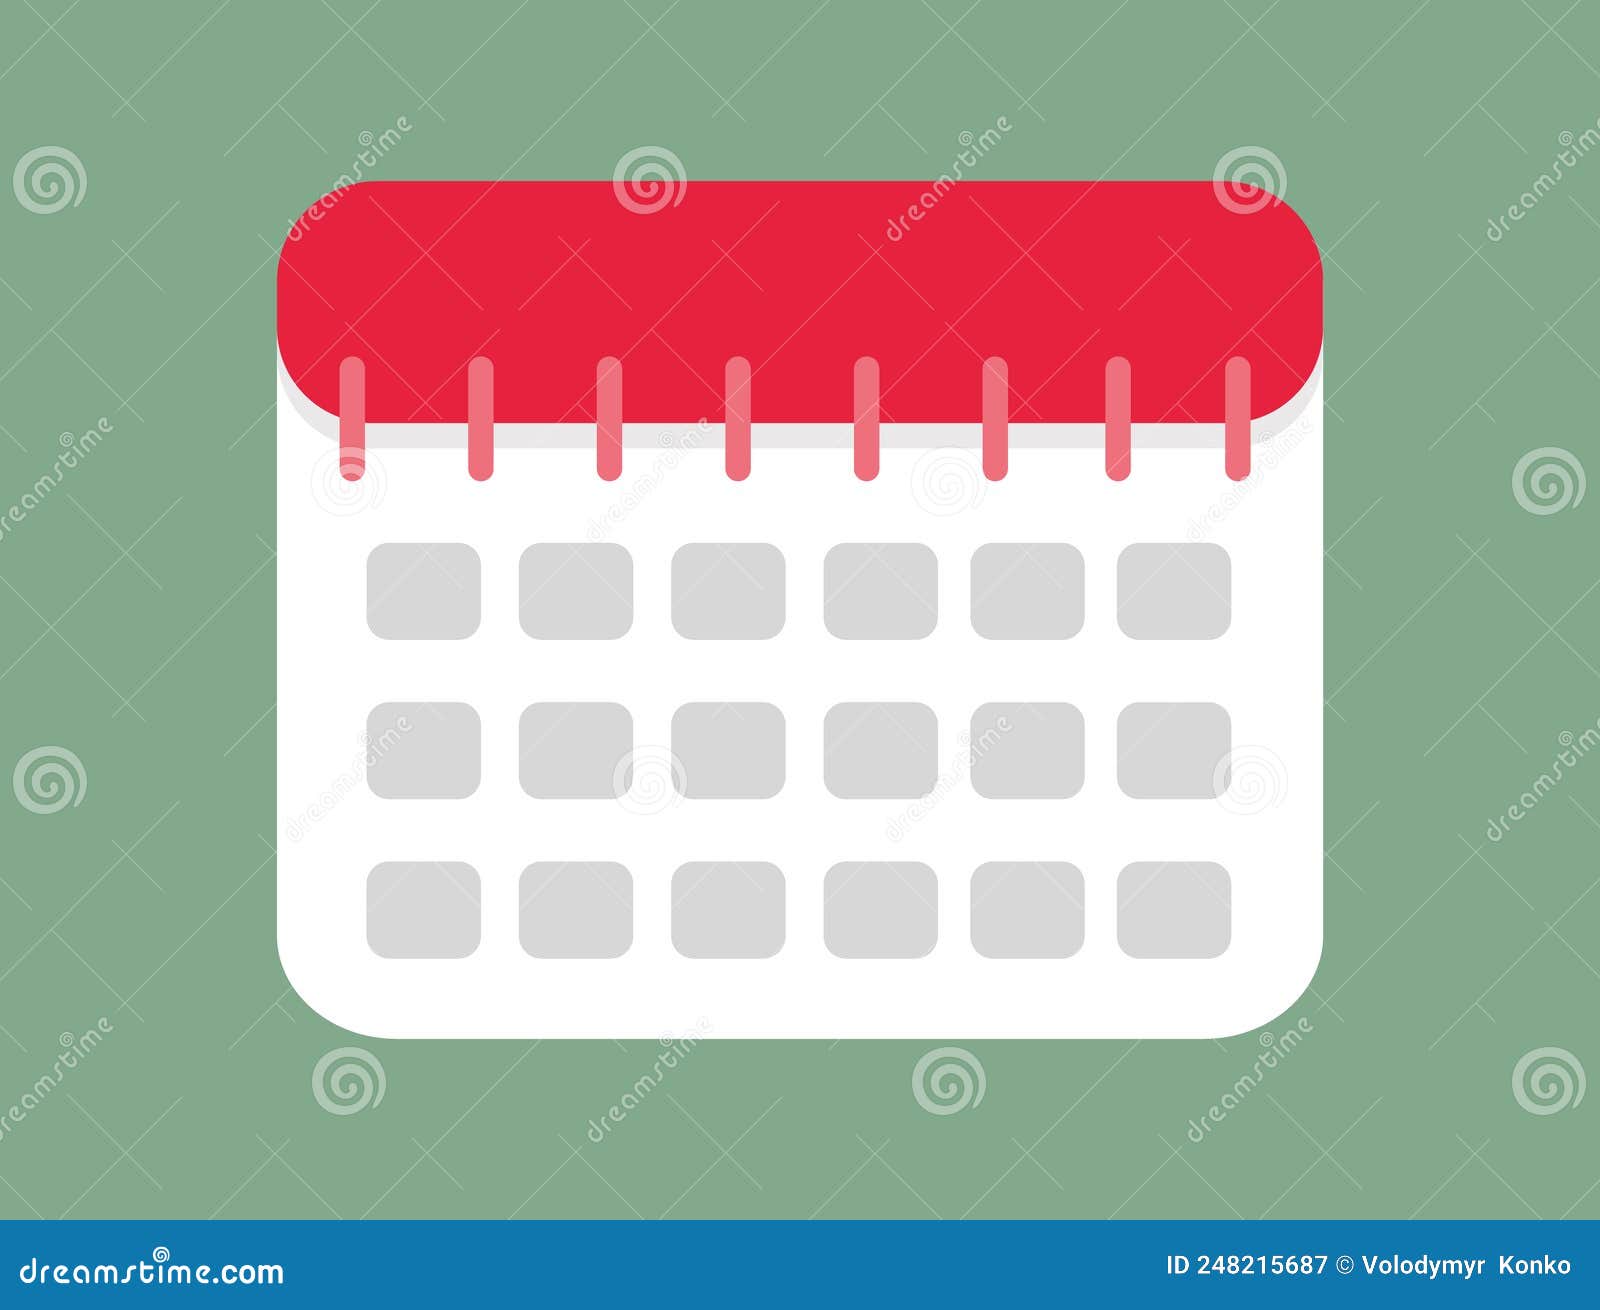 flat calendar icon  with date. reminder image